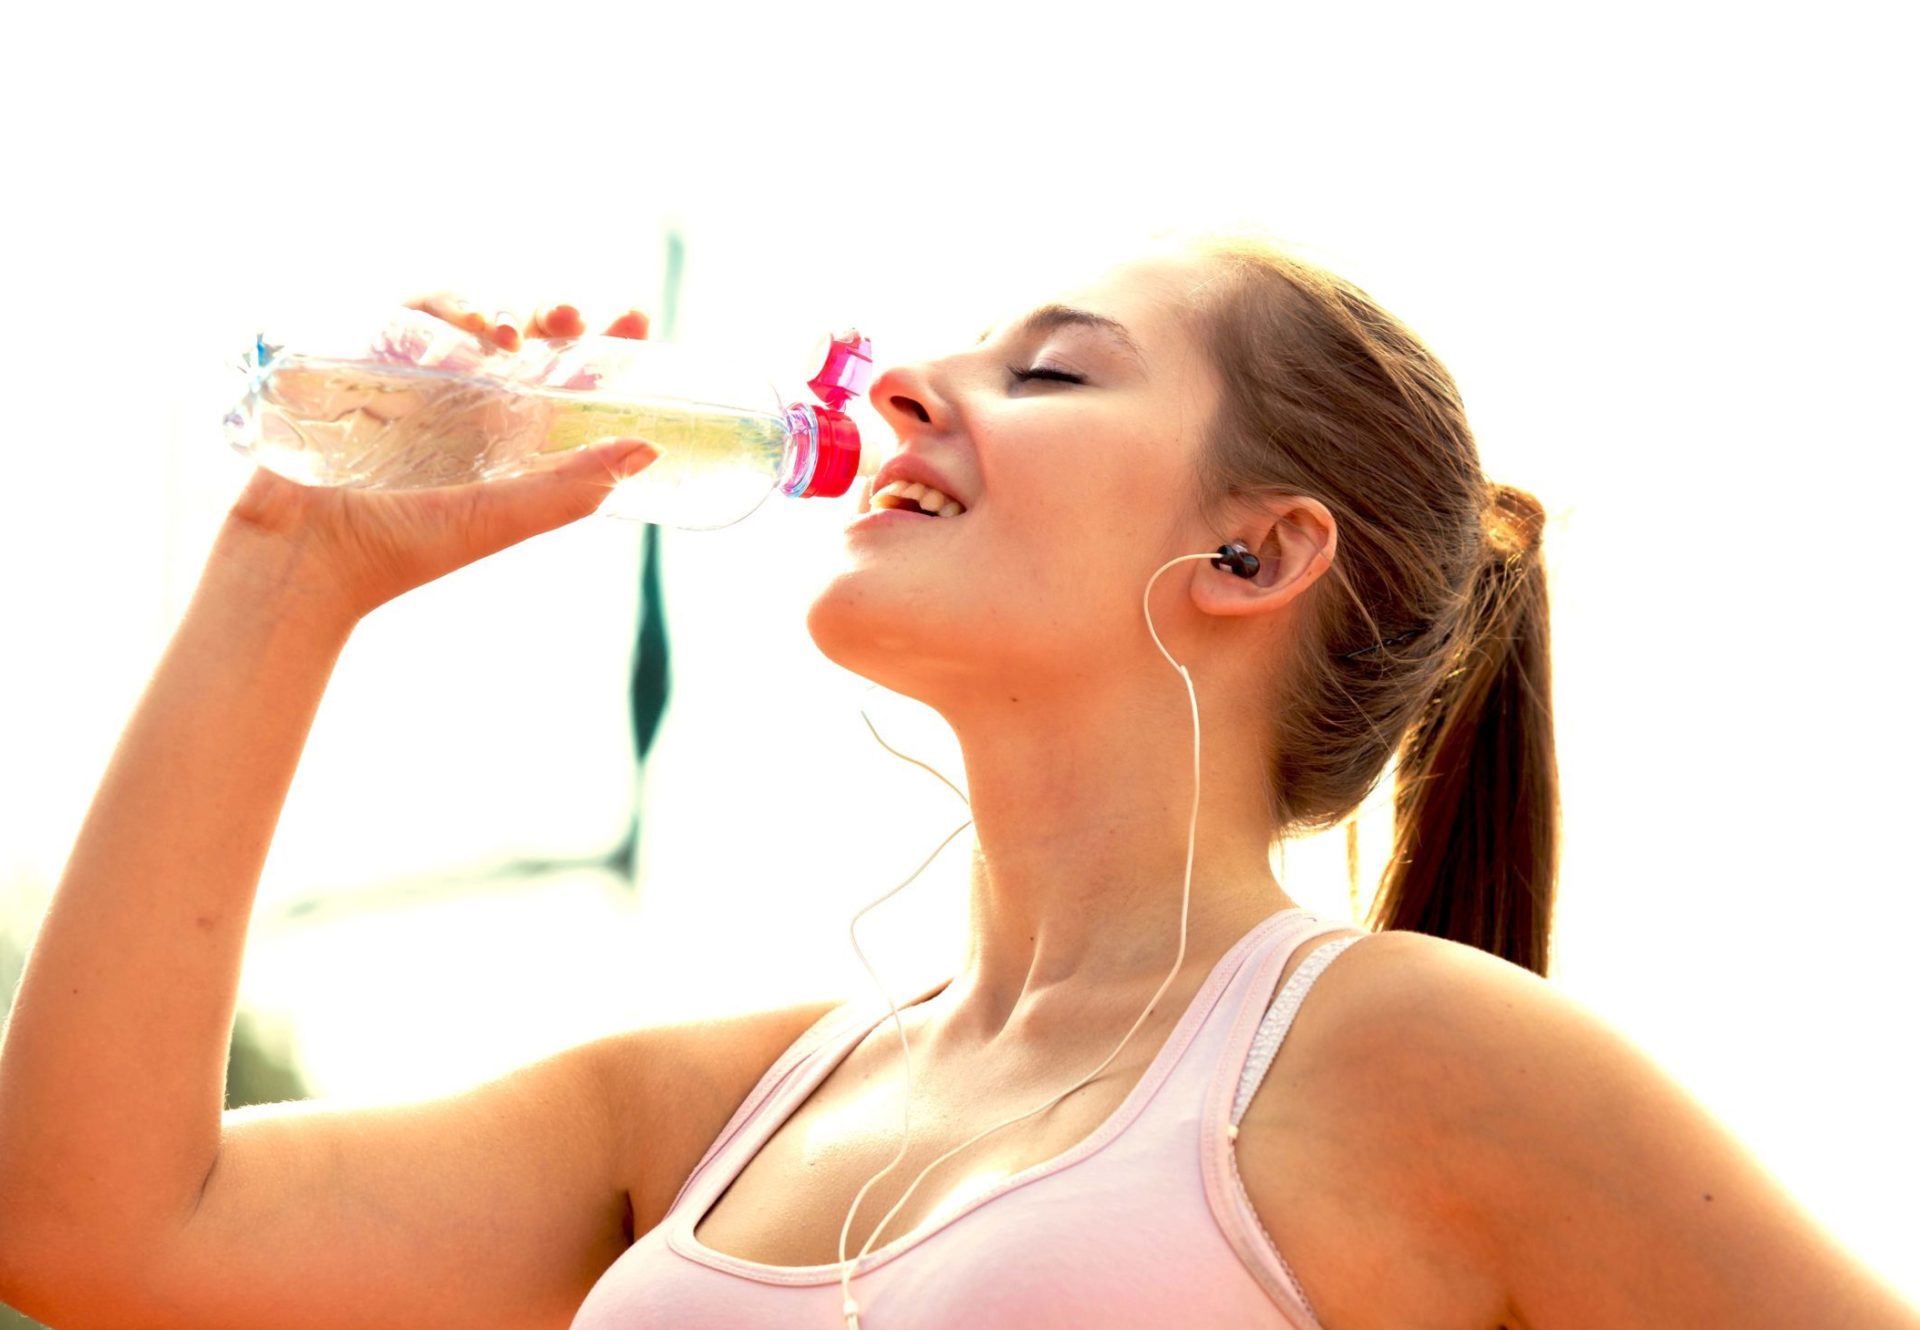 Woman drinking sports beverage with tethered closure